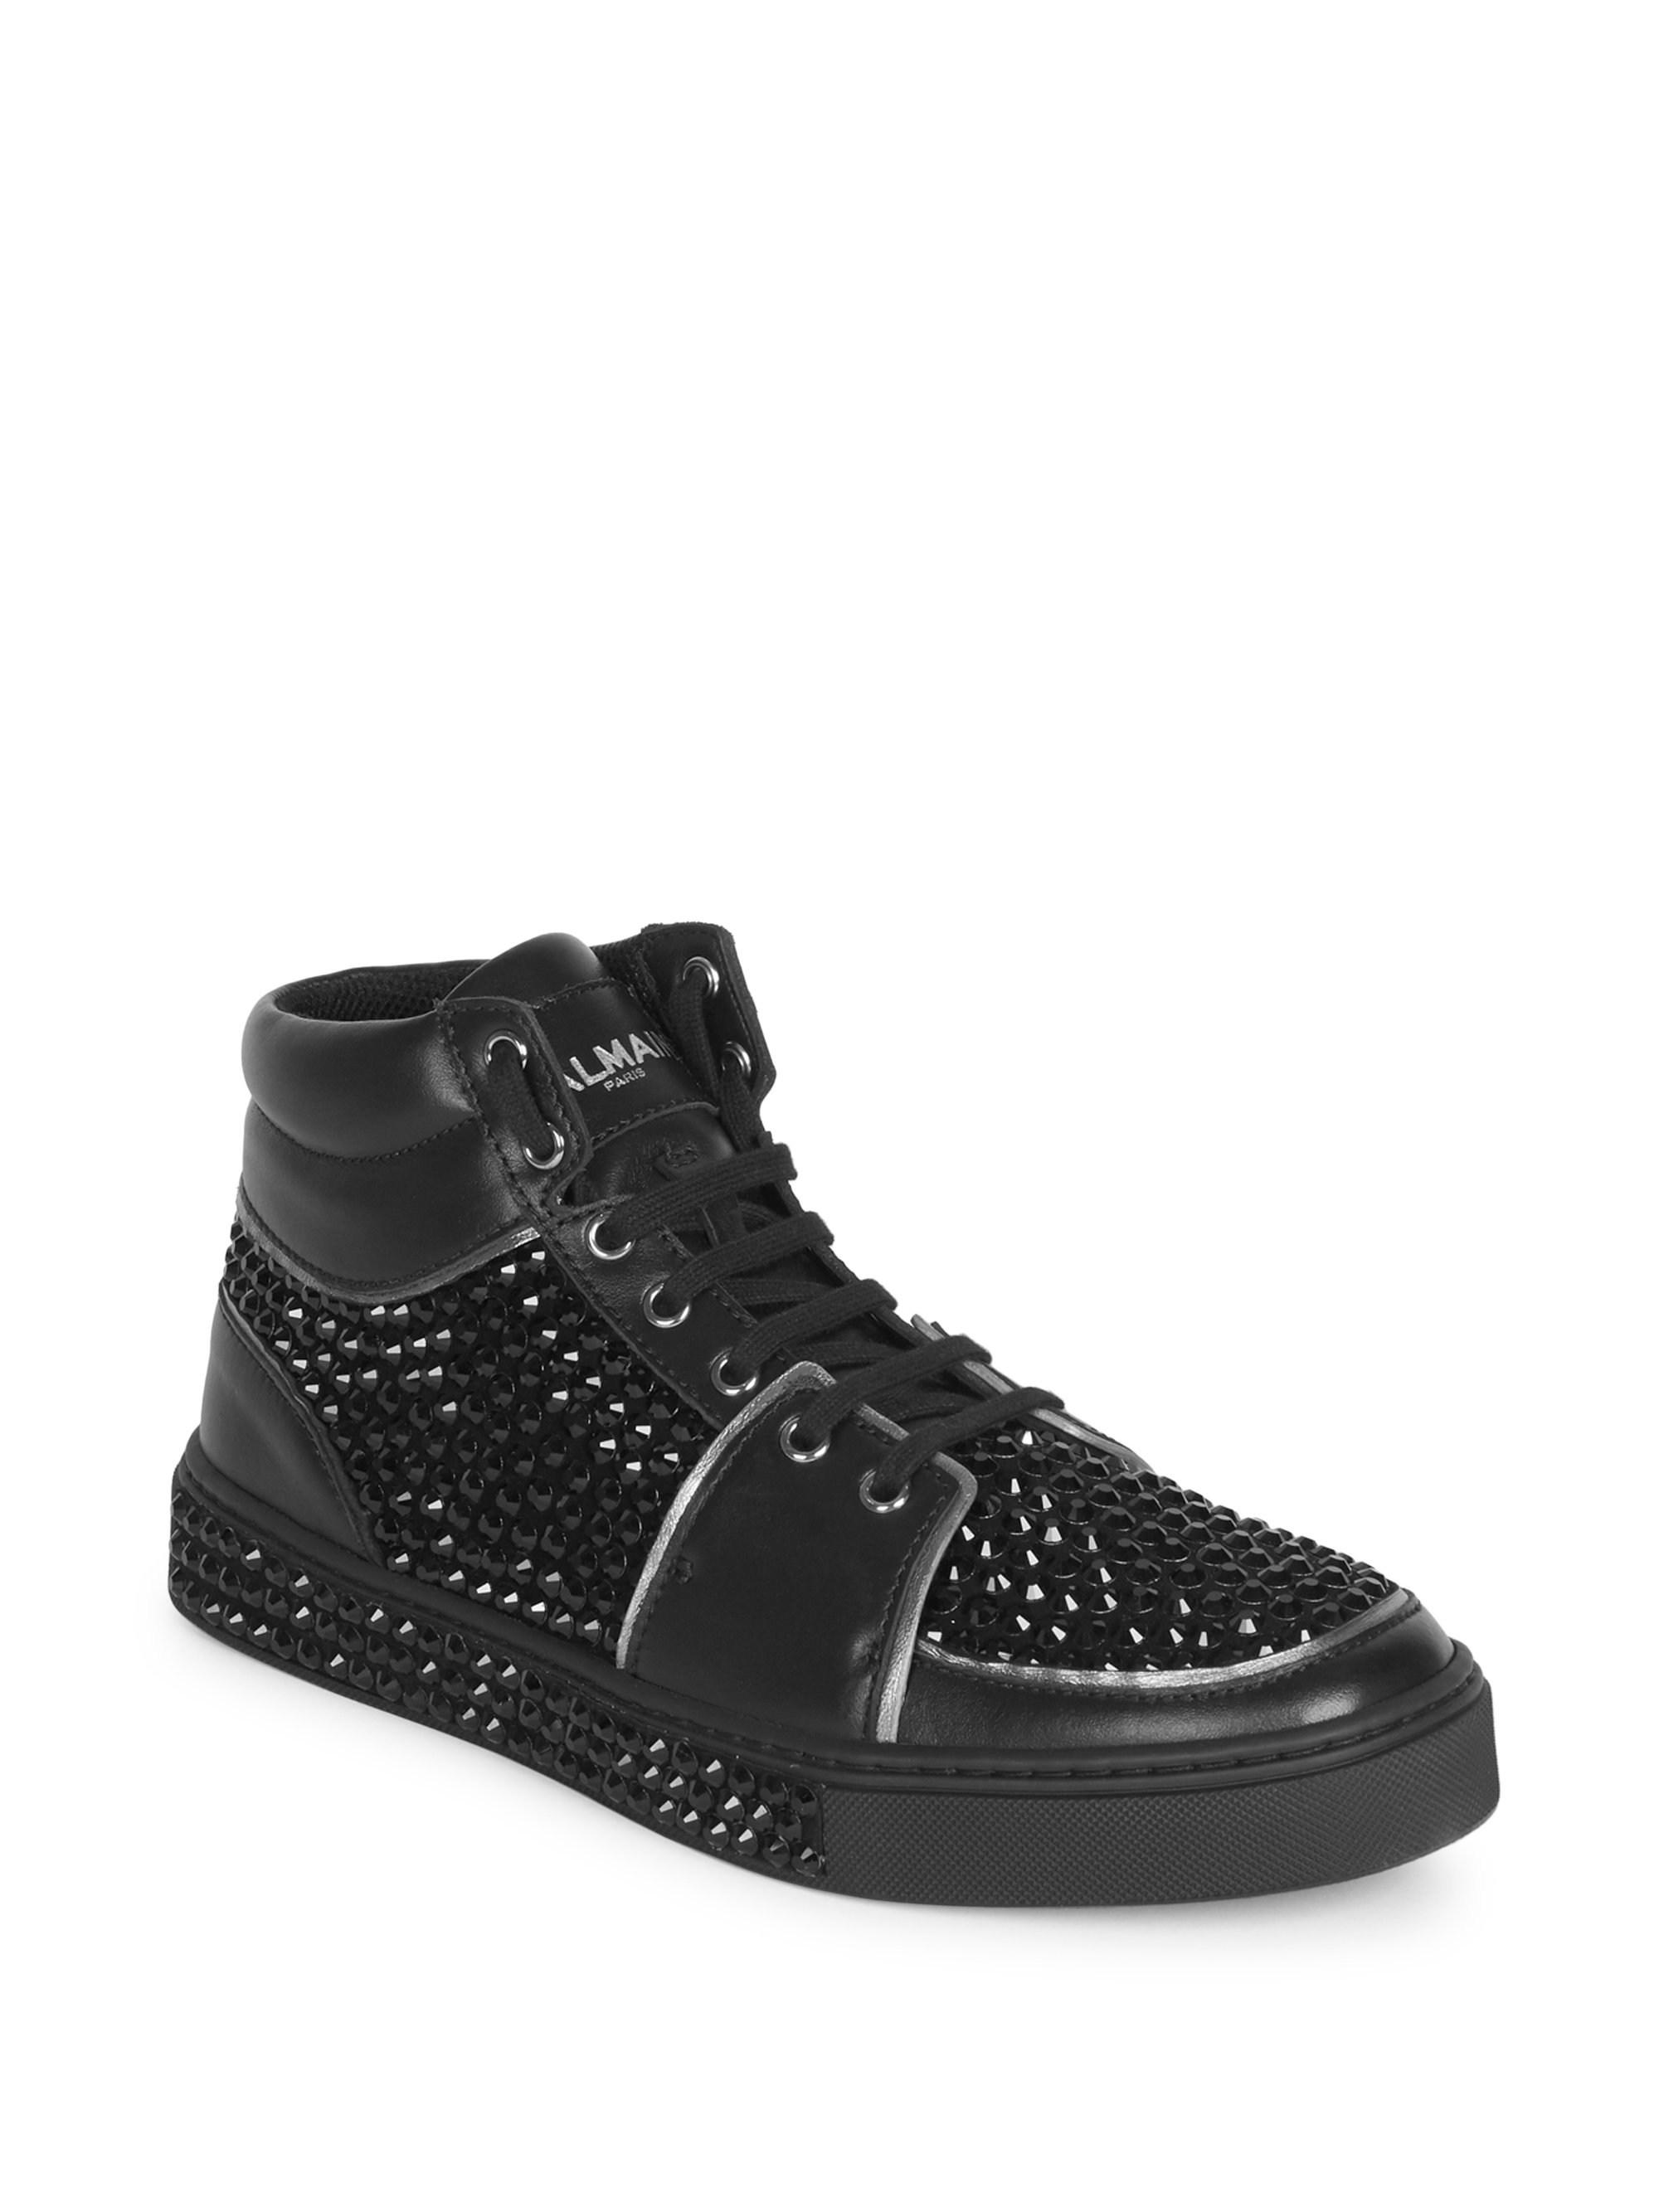 Balmain Studded Leather High-top Sneakers in Black for Men | Lyst